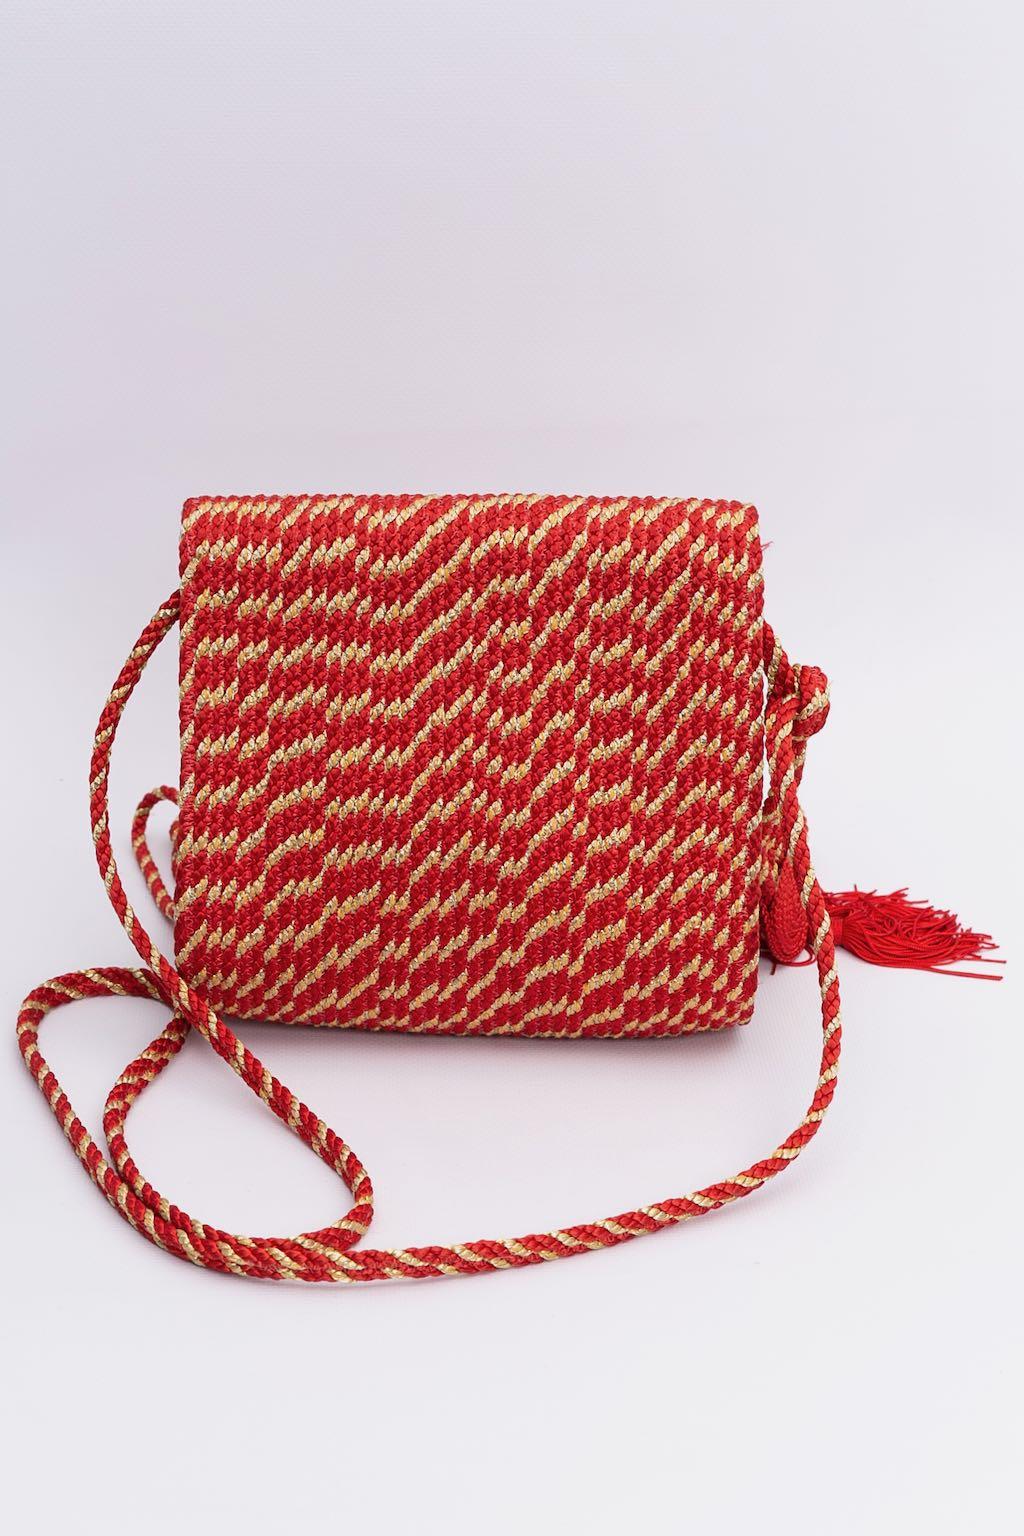 Ungaro Passementerie Bag in Red and Gold Leather In Good Condition For Sale In SAINT-OUEN-SUR-SEINE, FR